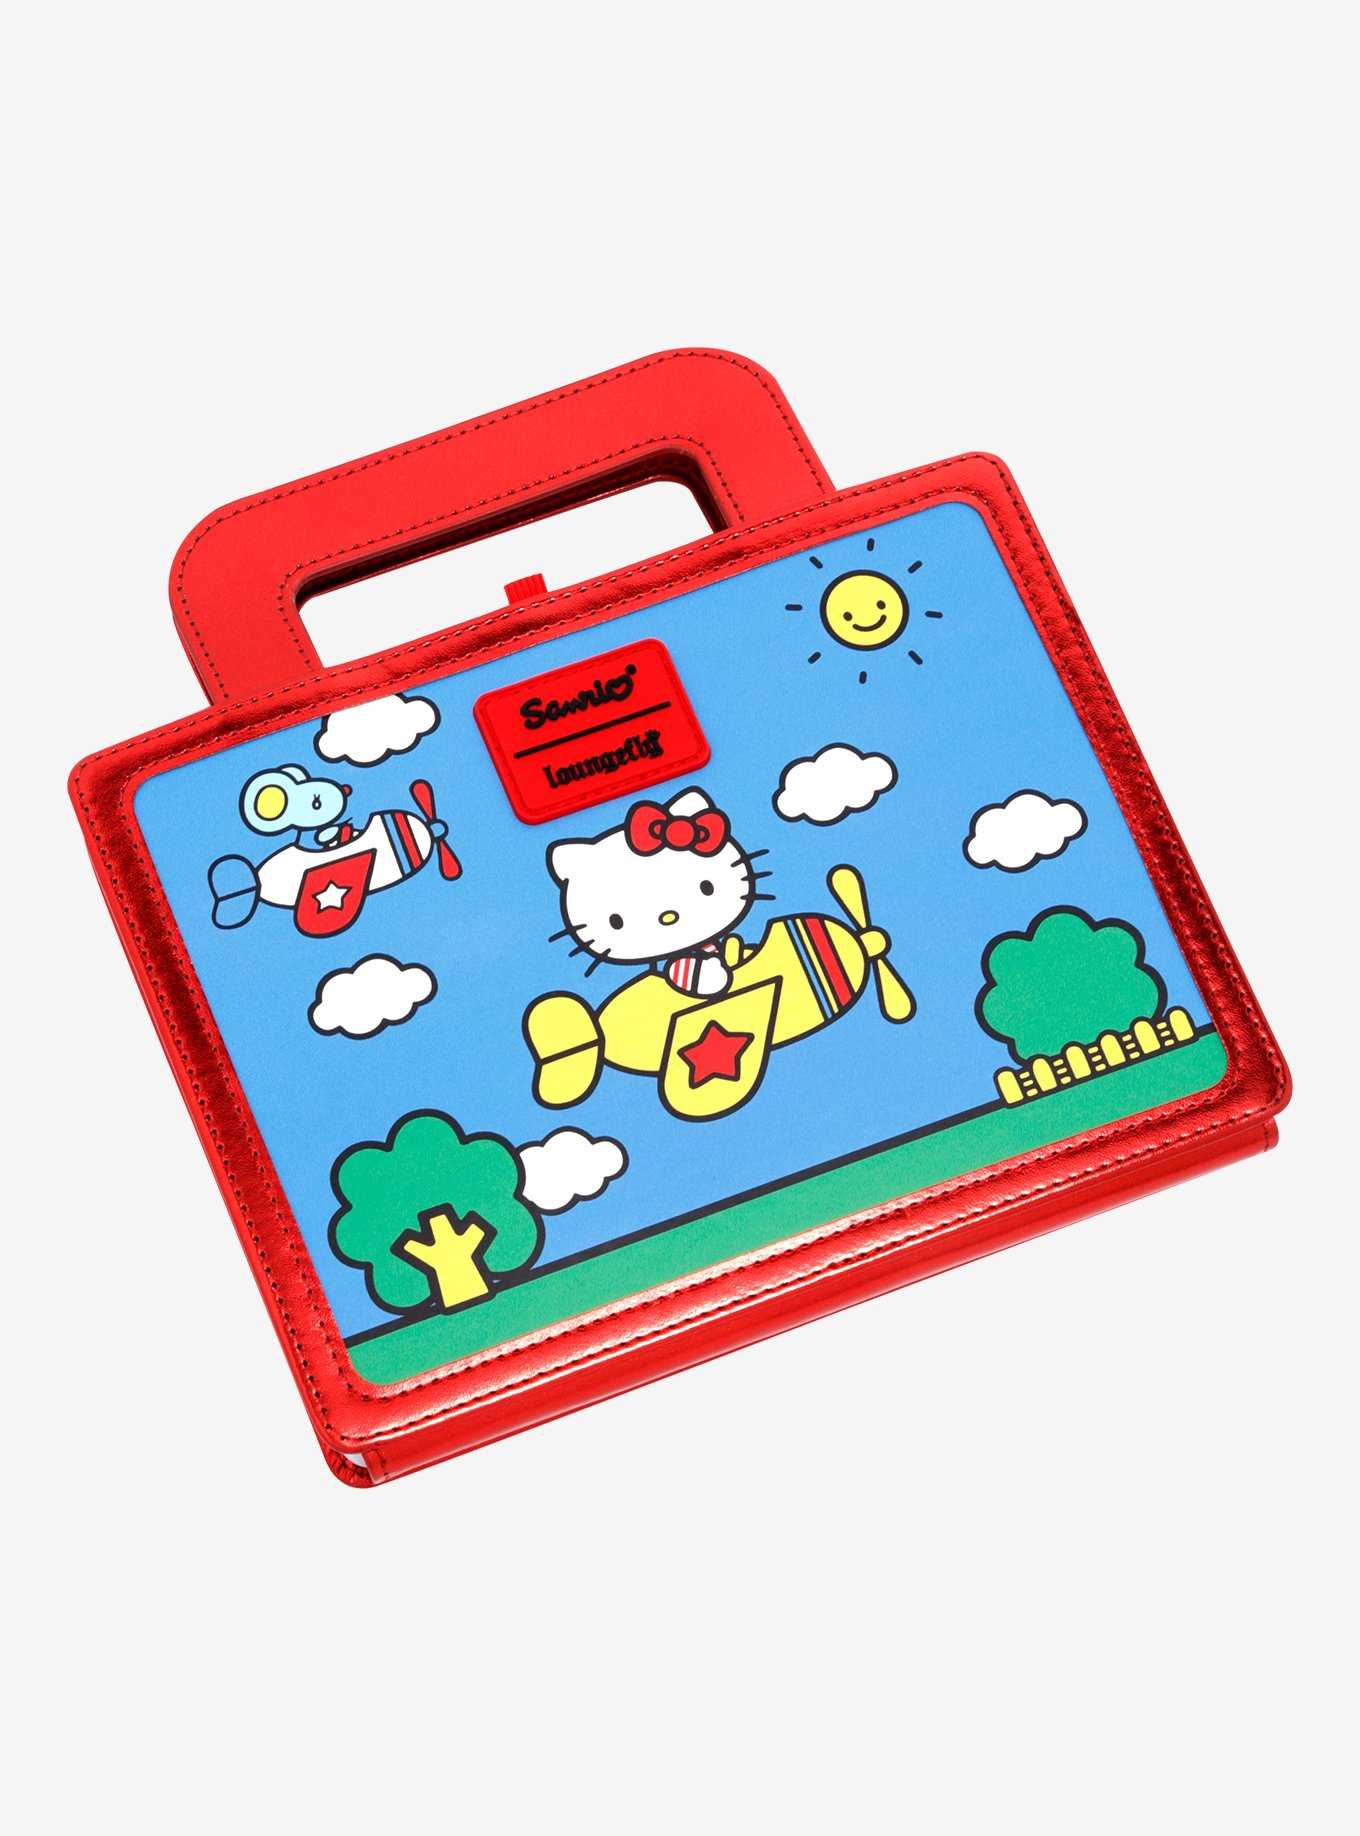 Hello Kitty Town Lunch Box Journal, , hi-res